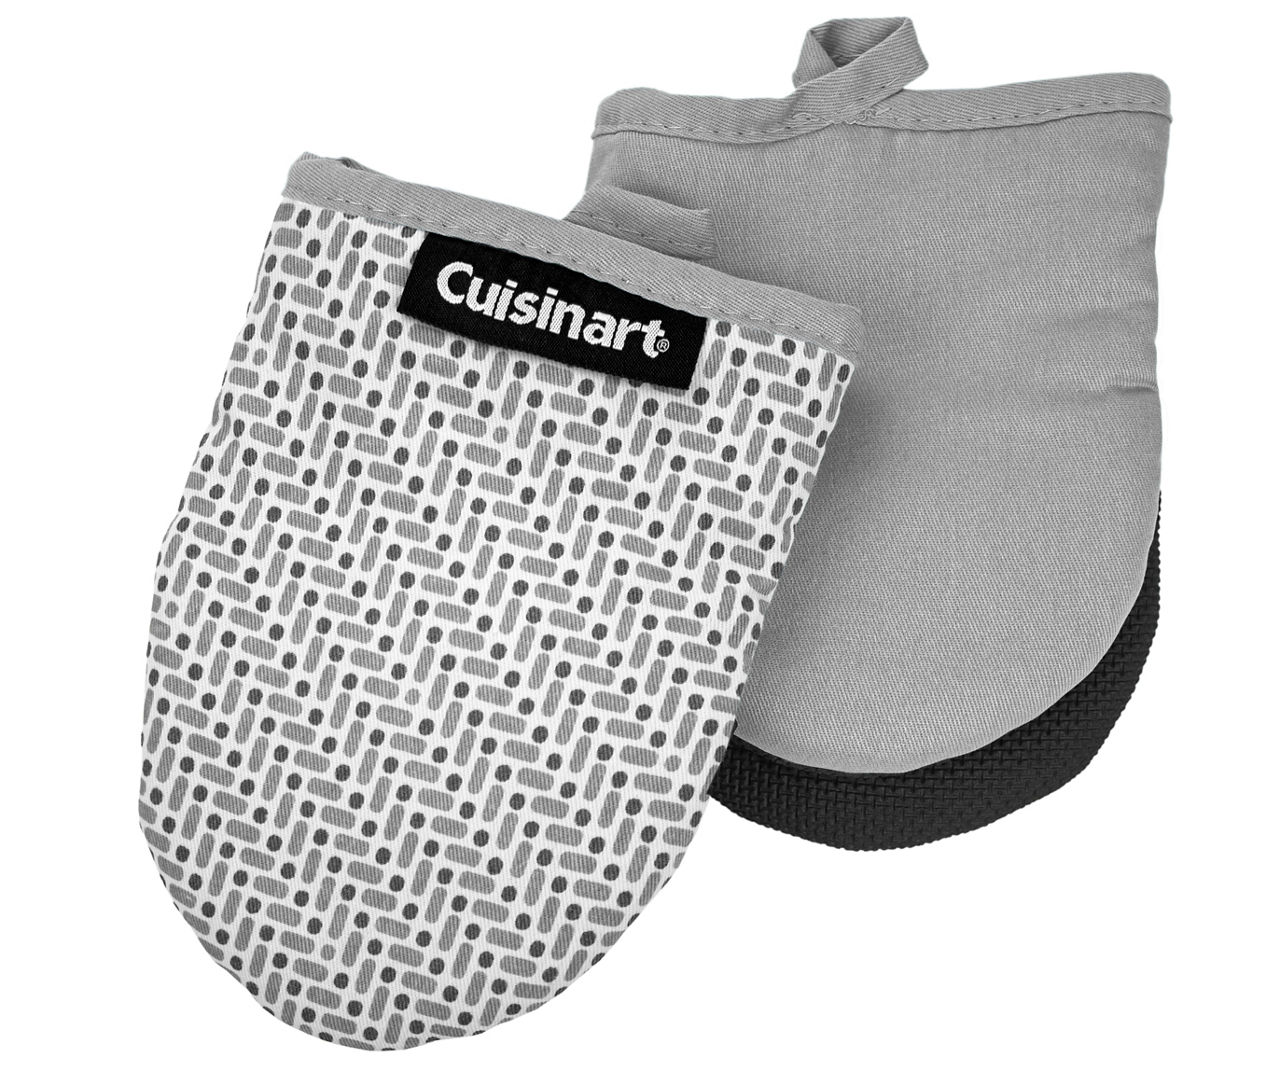 Cuisinart Red Patterned Silicone Oven Mitt 